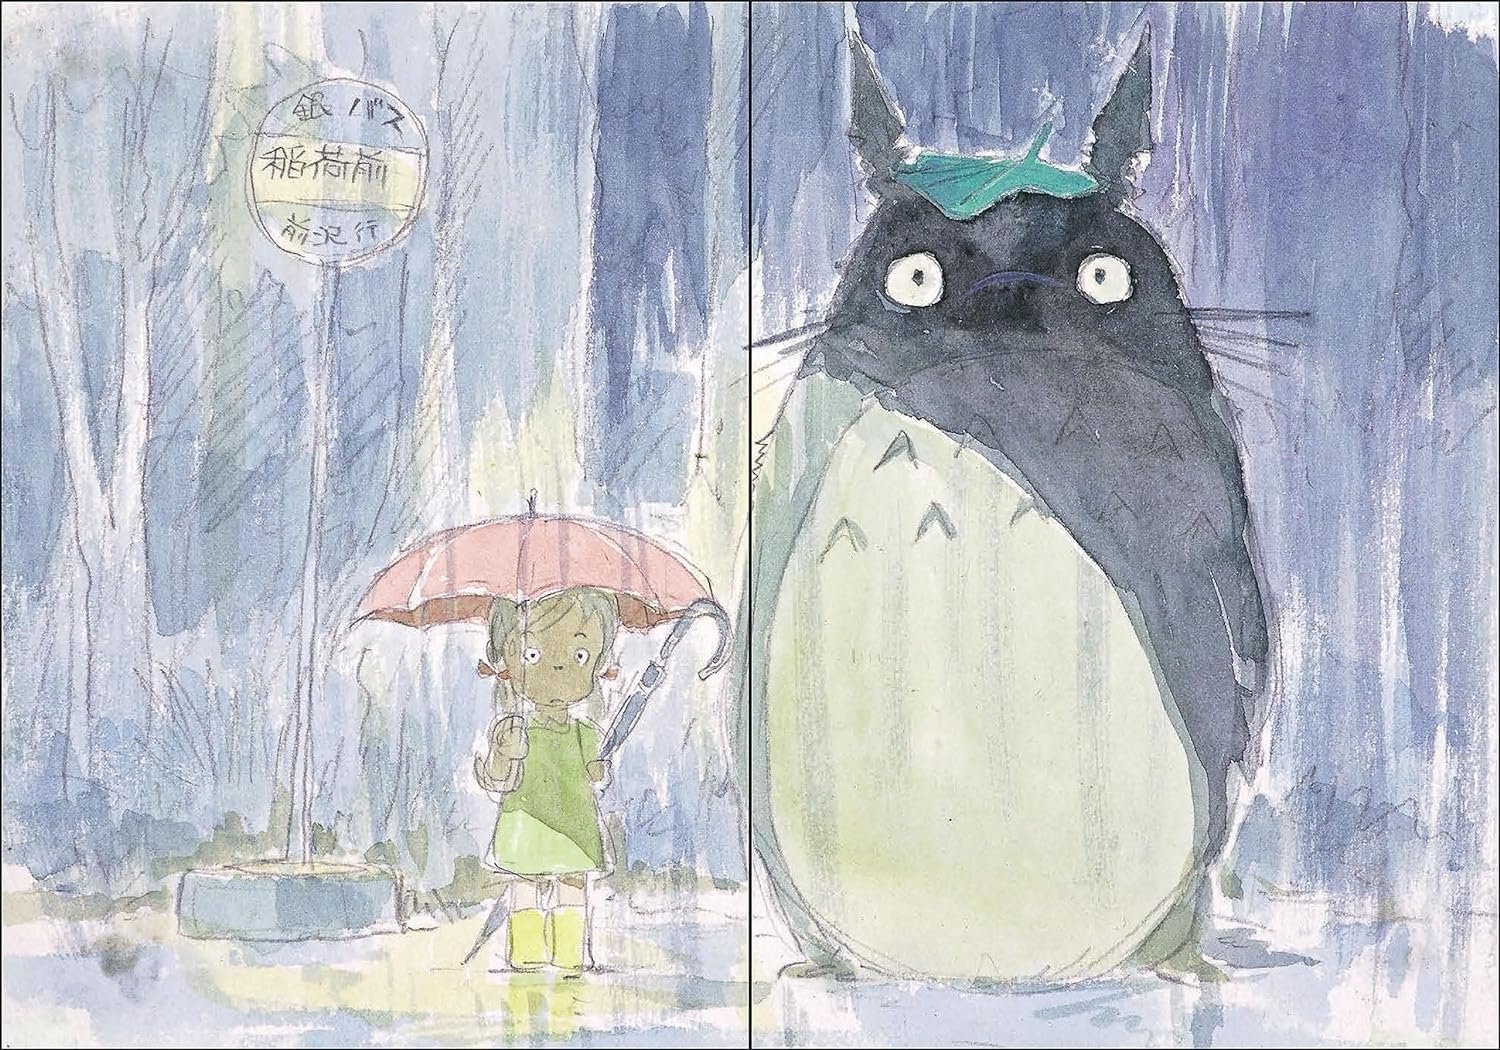 My Neighbor Totoro Journal - Out of the Blue